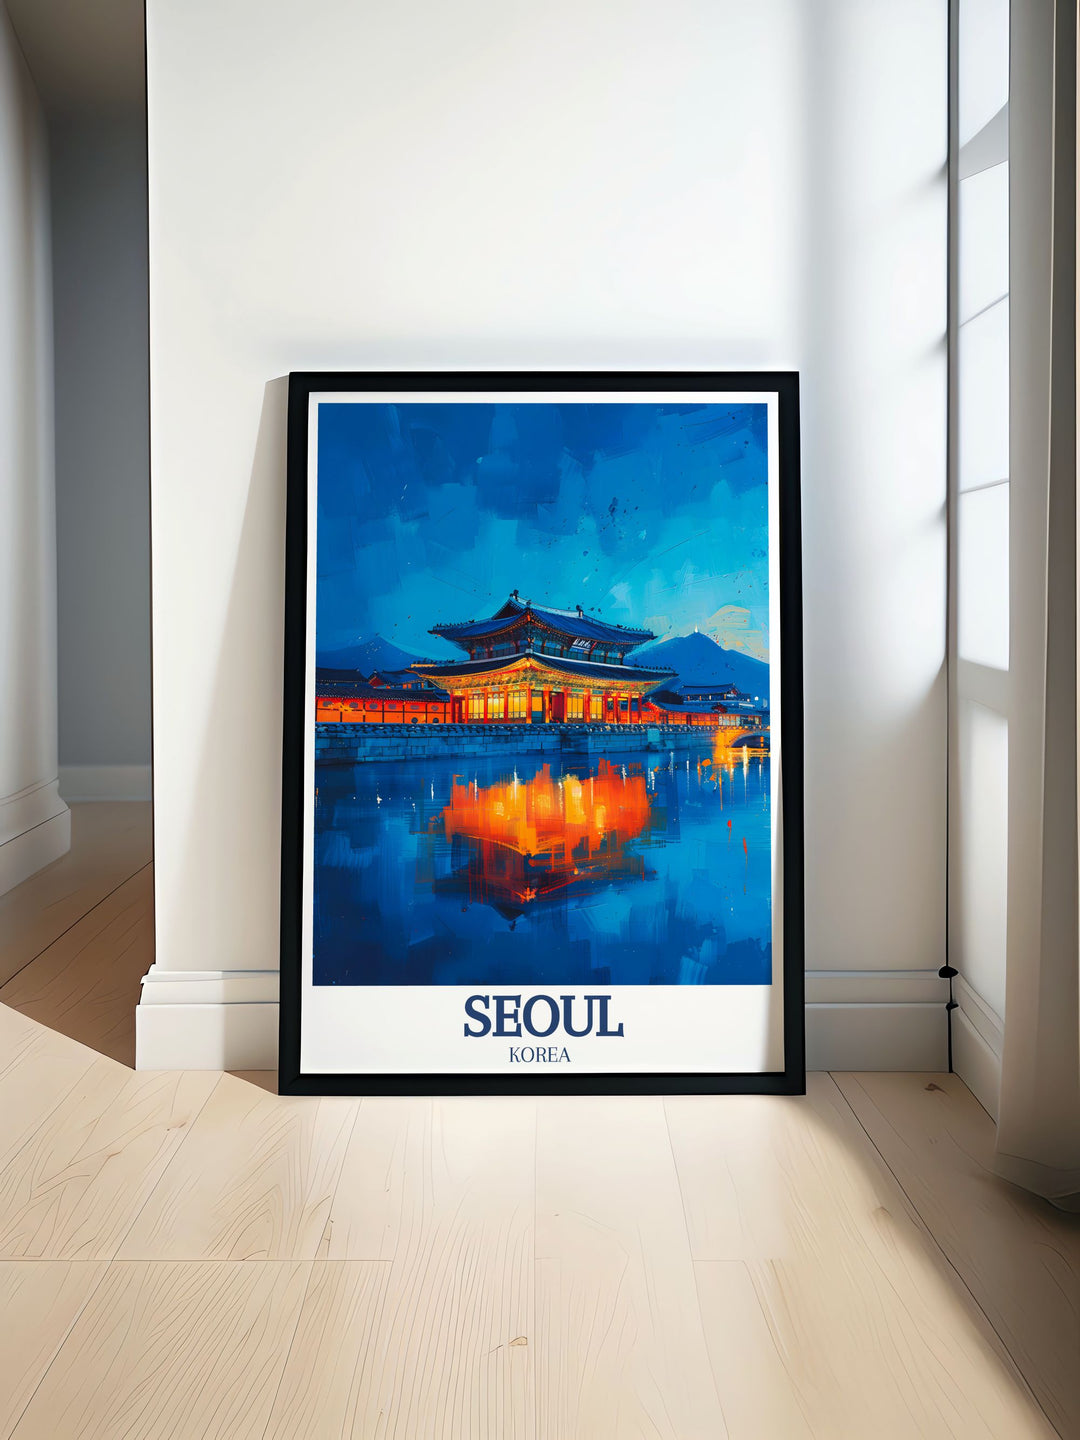 Captivating Seoul Poster featuring the iconic Gyeongbokgung Palace and the serene Han River perfect for home decor and traveler gifts showcasing the rich cultural heritage of South Korea and the beauty of Seoul with vibrant colors and detailed craftsmanship